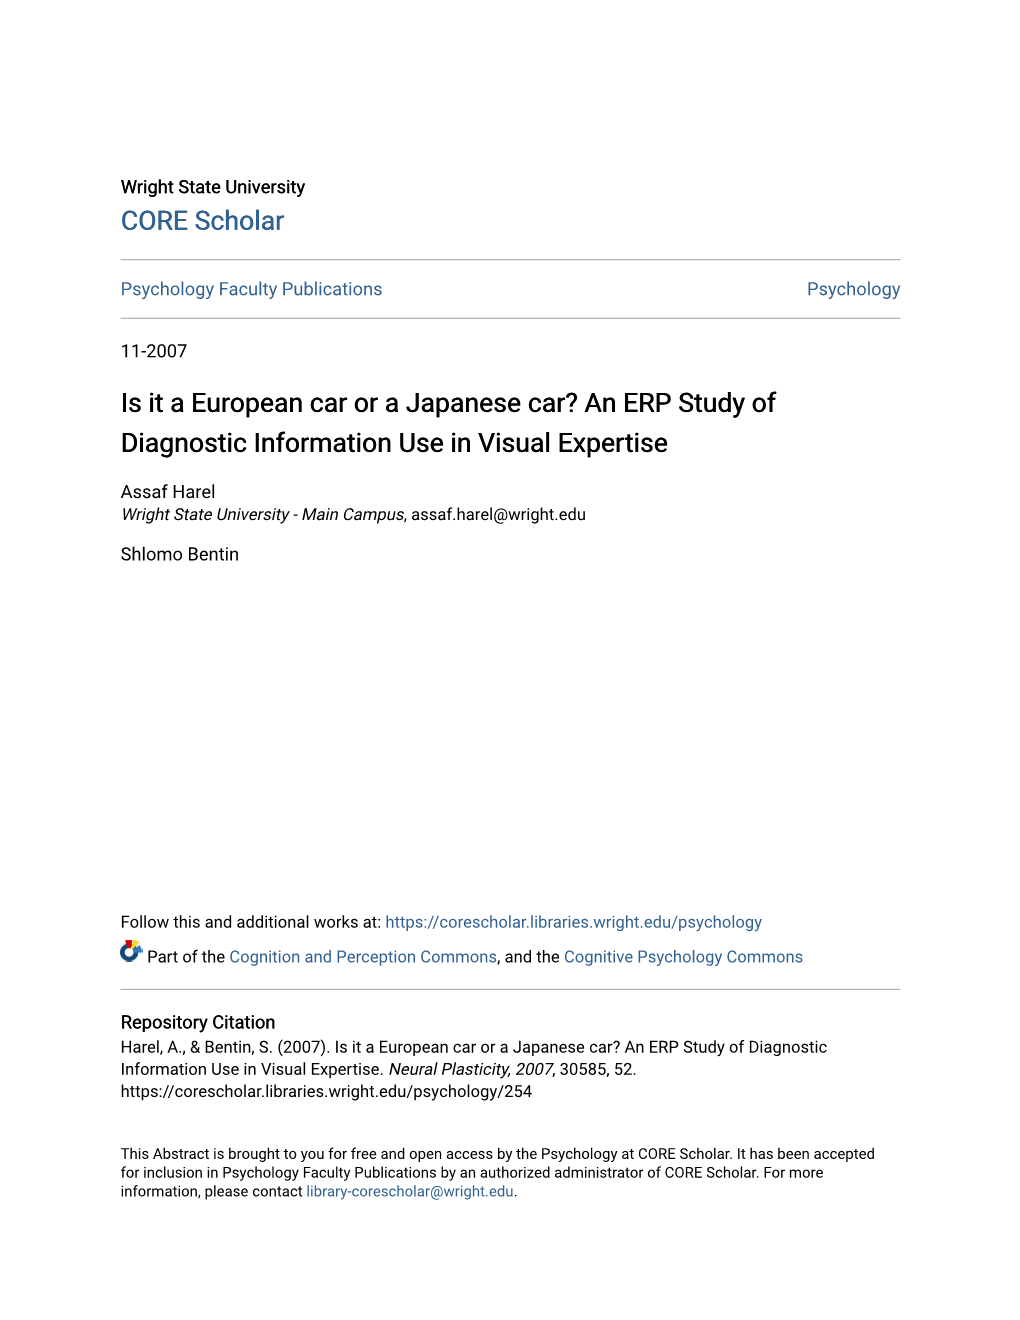 Is It a European Car Or a Japanese Car? an ERP Study of Diagnostic Information Use in Visual Expertise